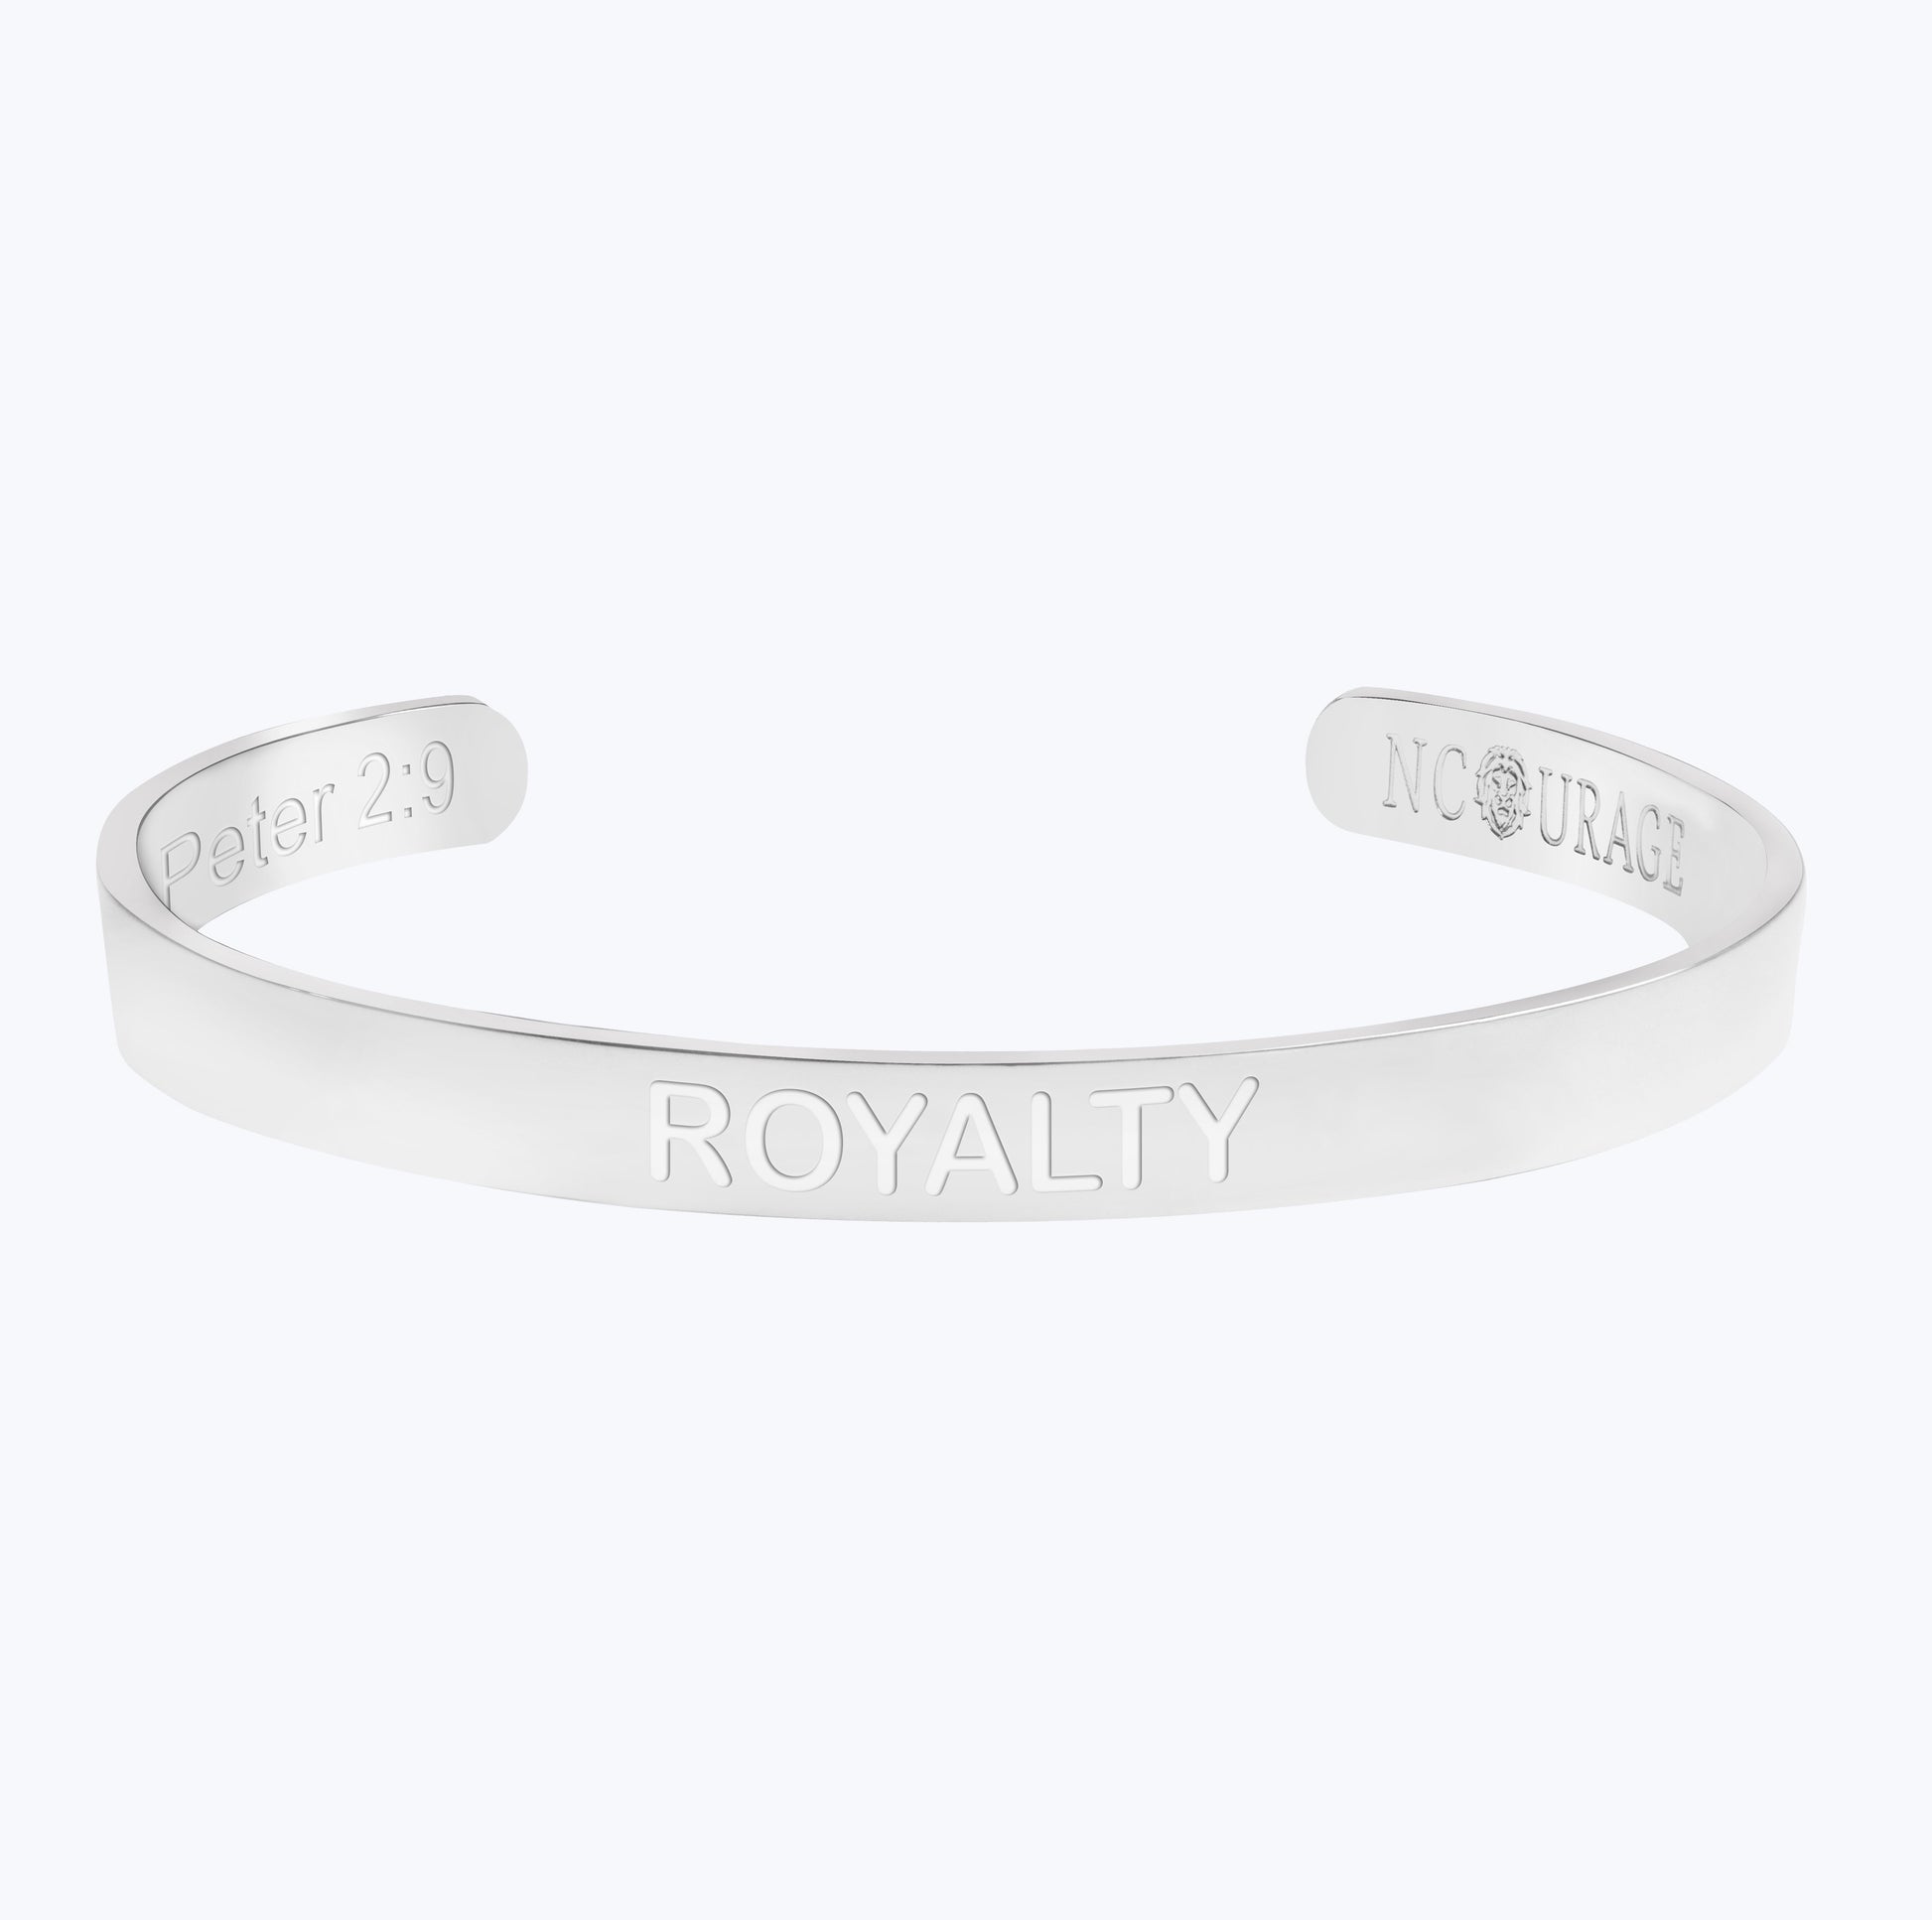 ROYALTY - NCOURAGE Bands and Bracelets